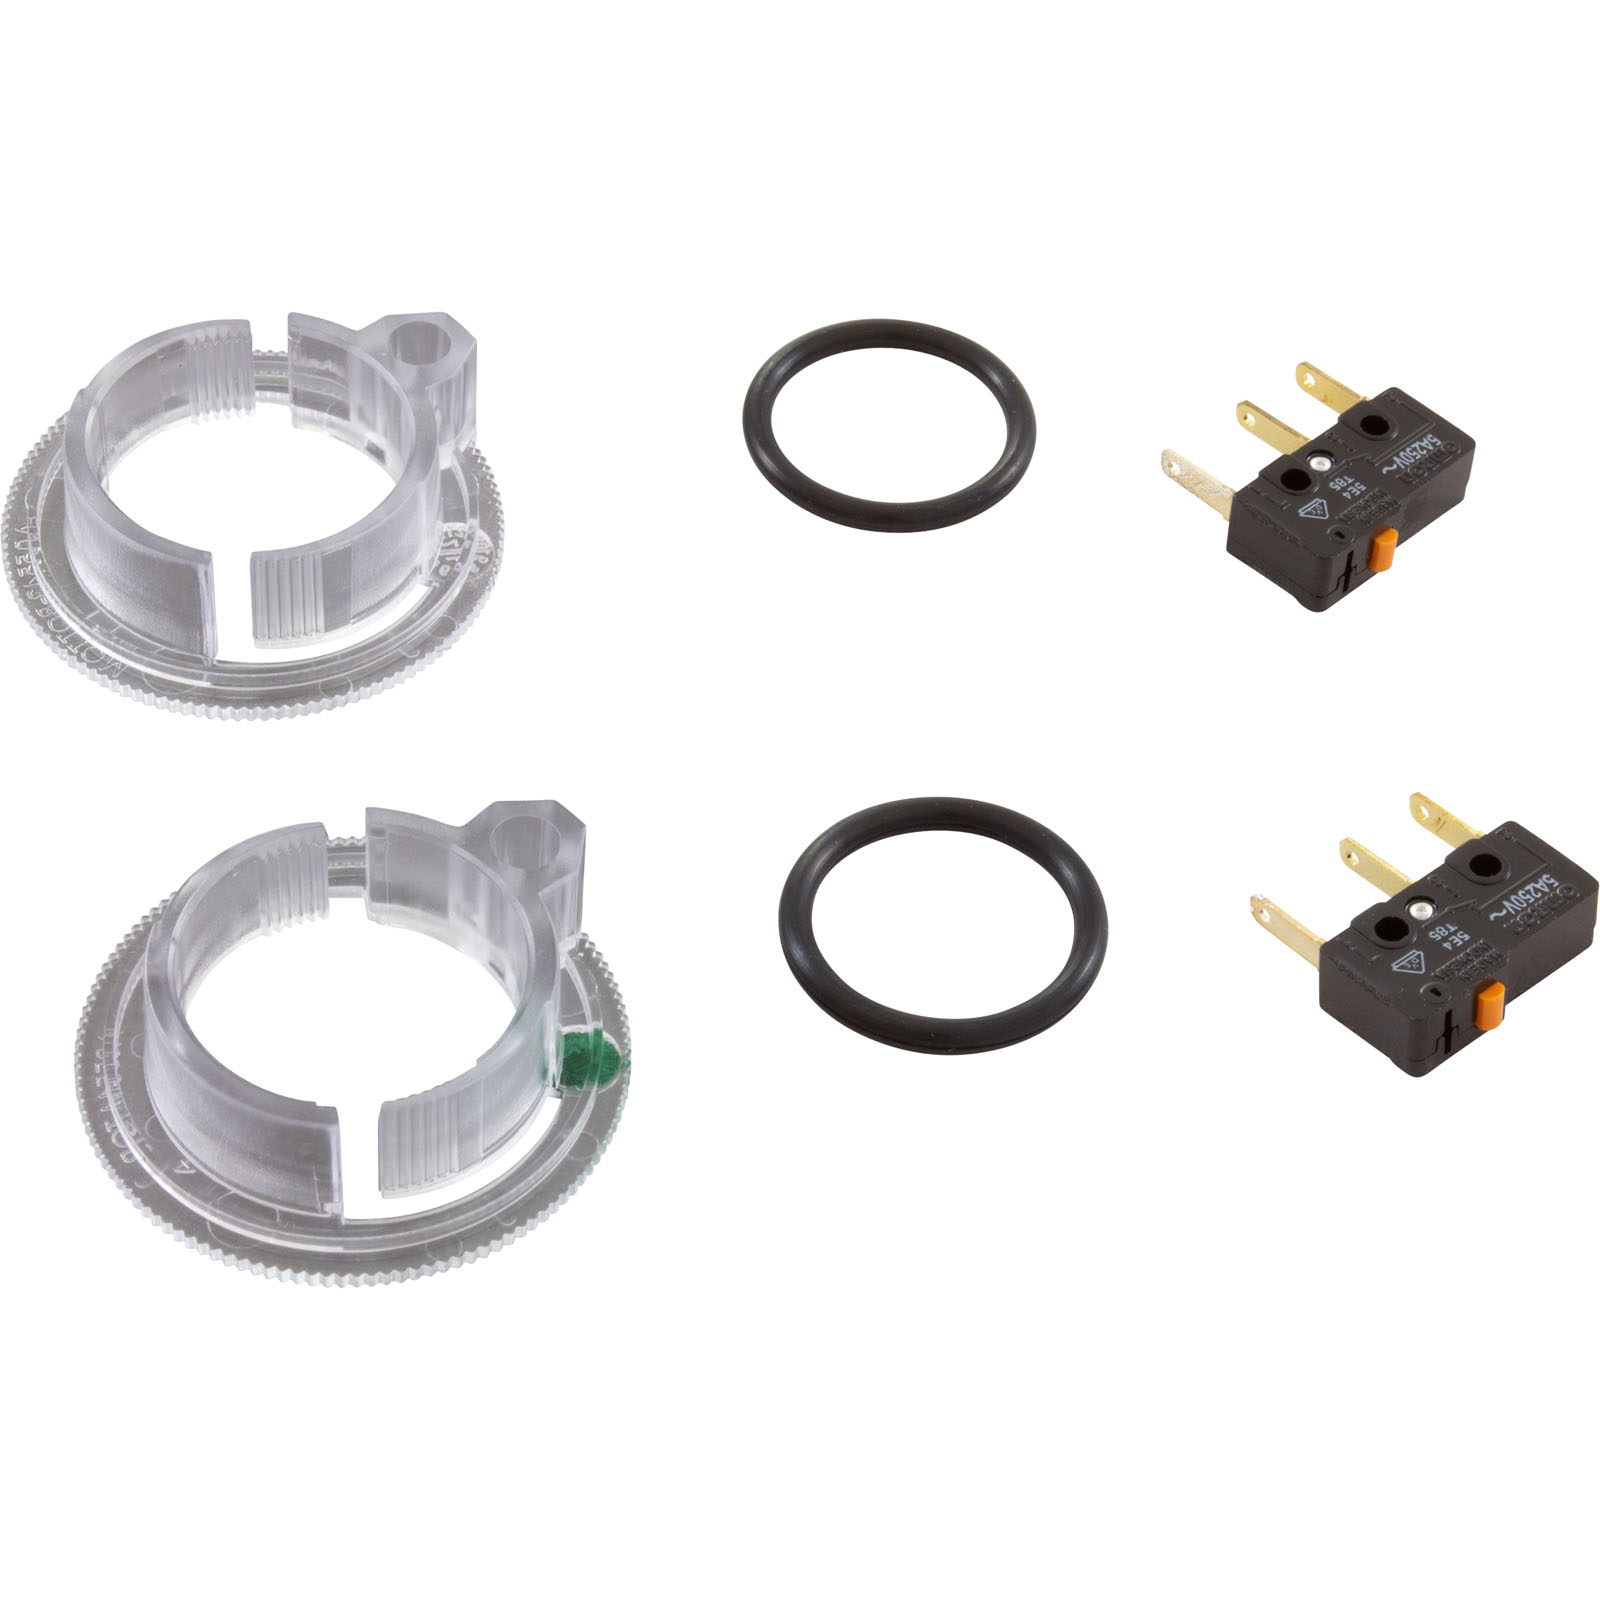 Picture of R0408600 Microswitch Kit Zodiac Jandy Valve Actuator w/ Cams